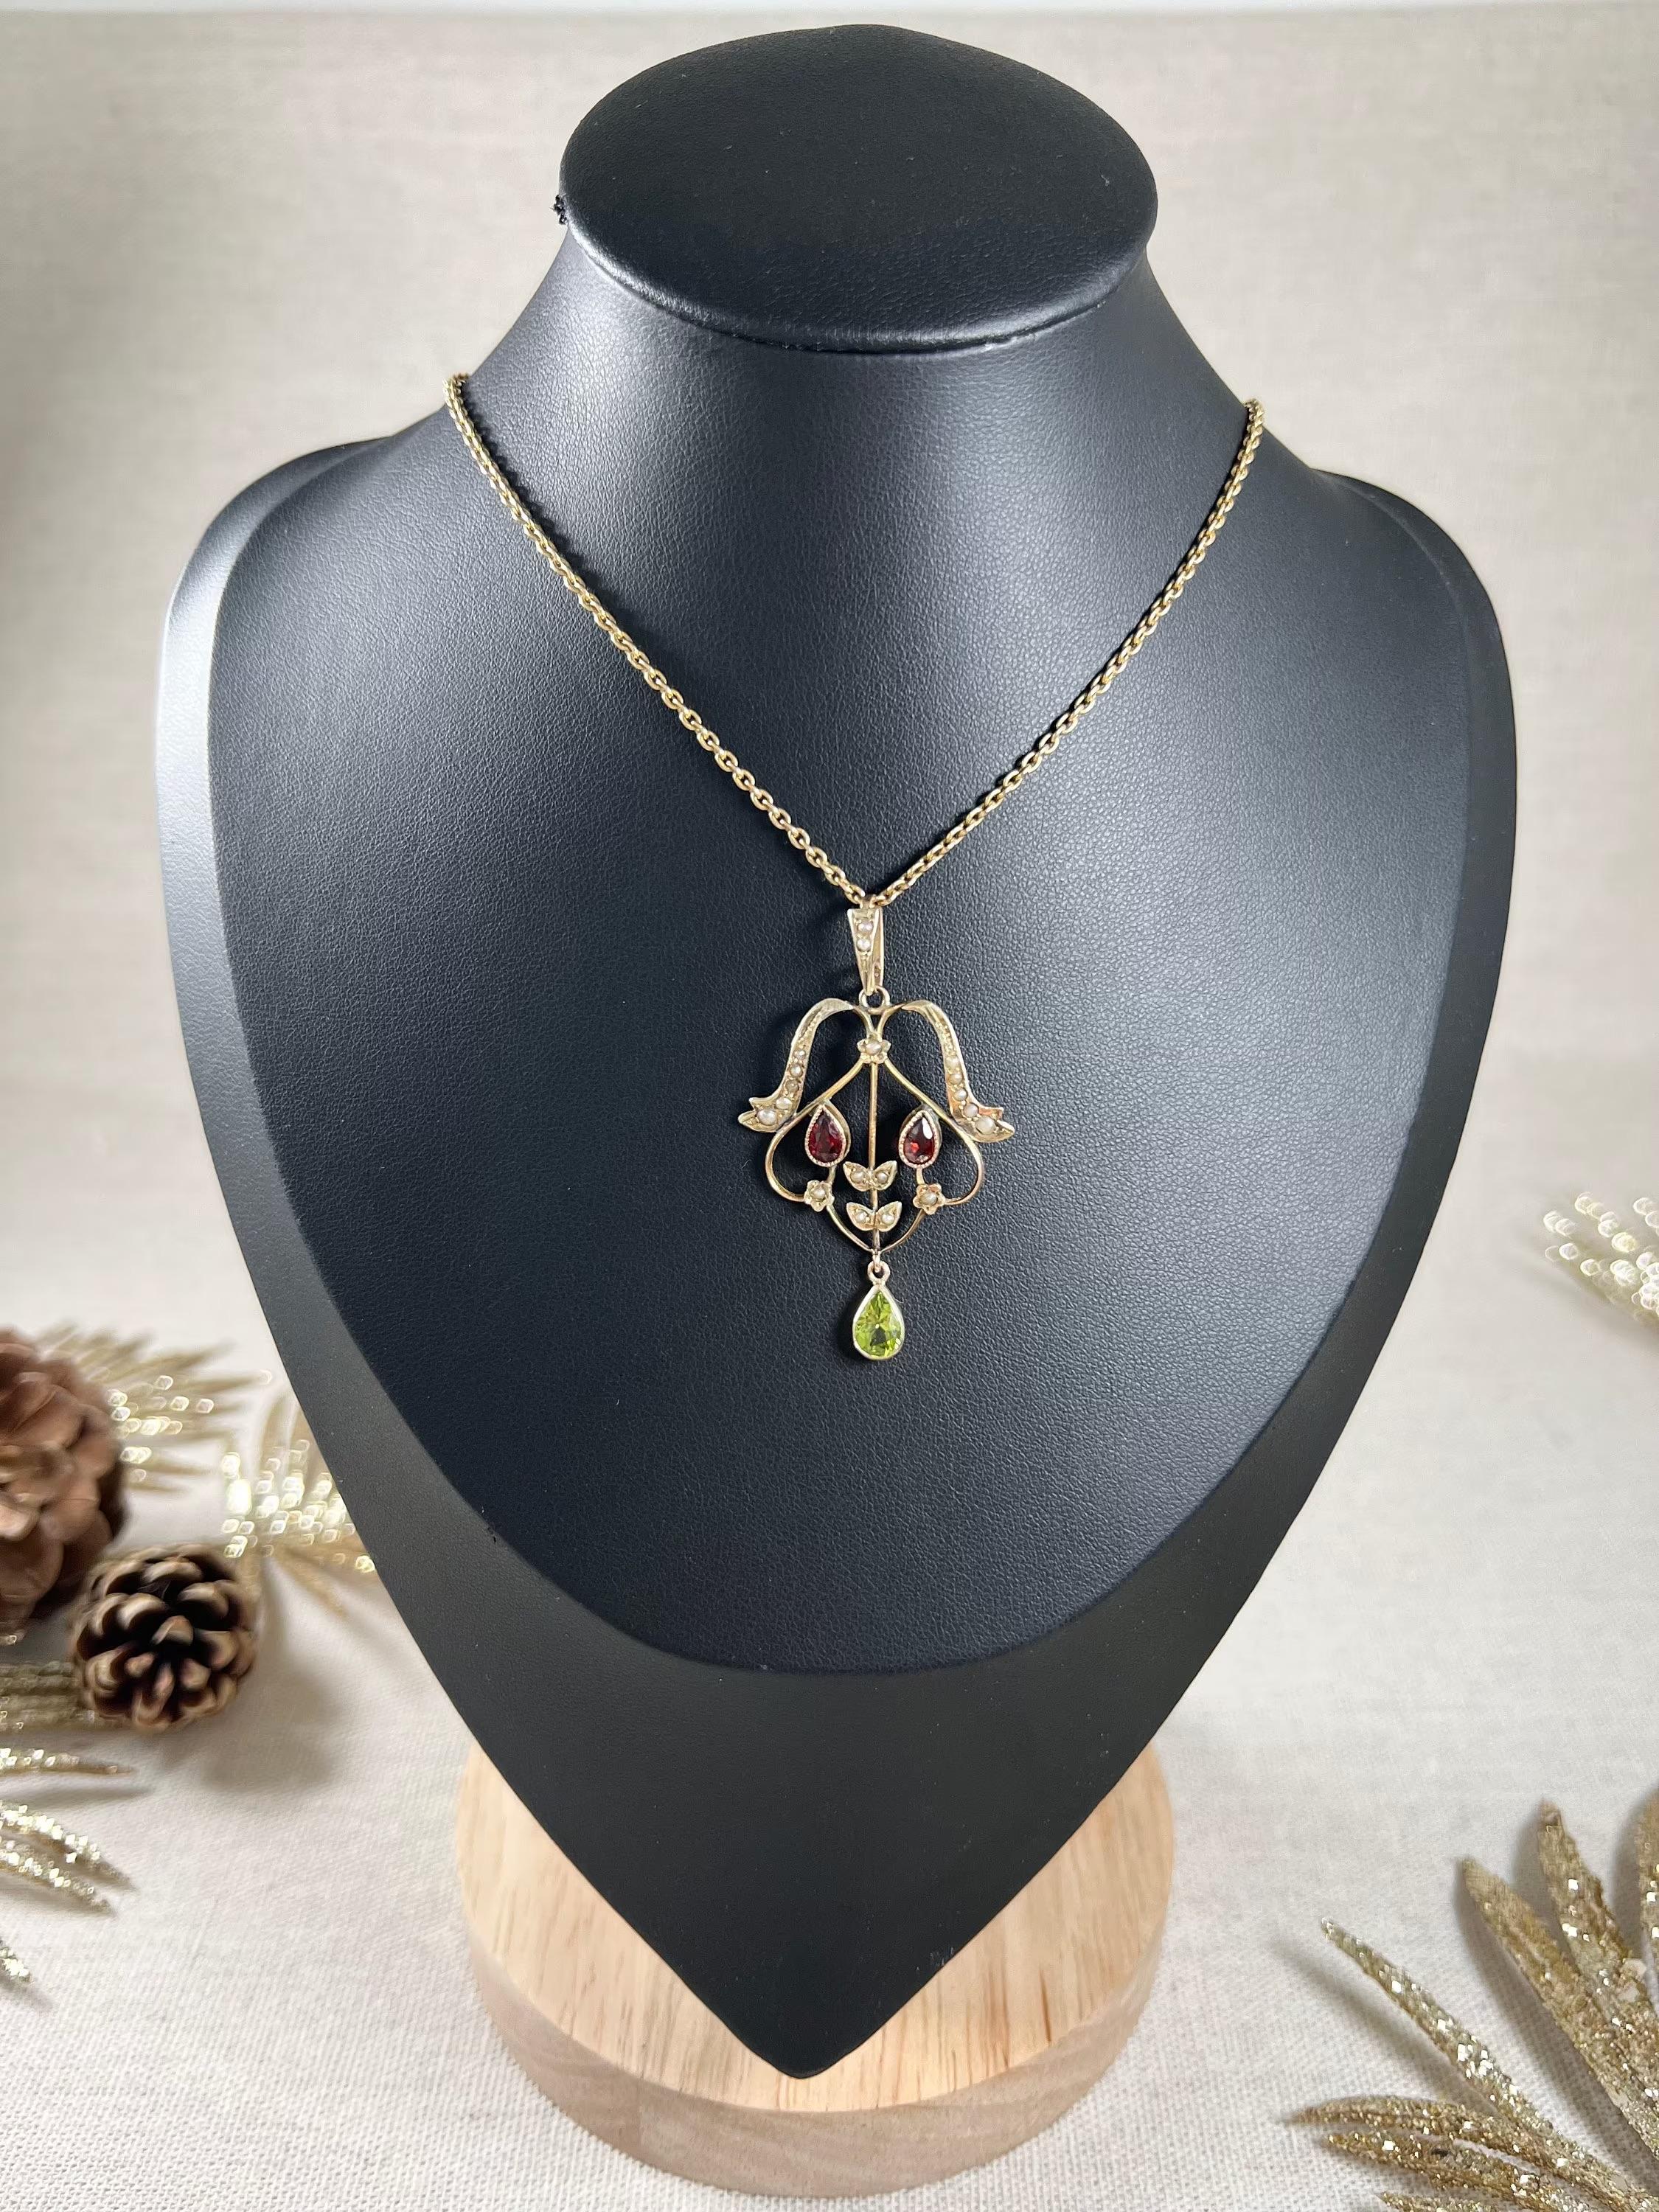 Antique 9ct Gold Edwardian Suffragette Pendant Garnets Peridot Drop Seed pearls For Sale 3